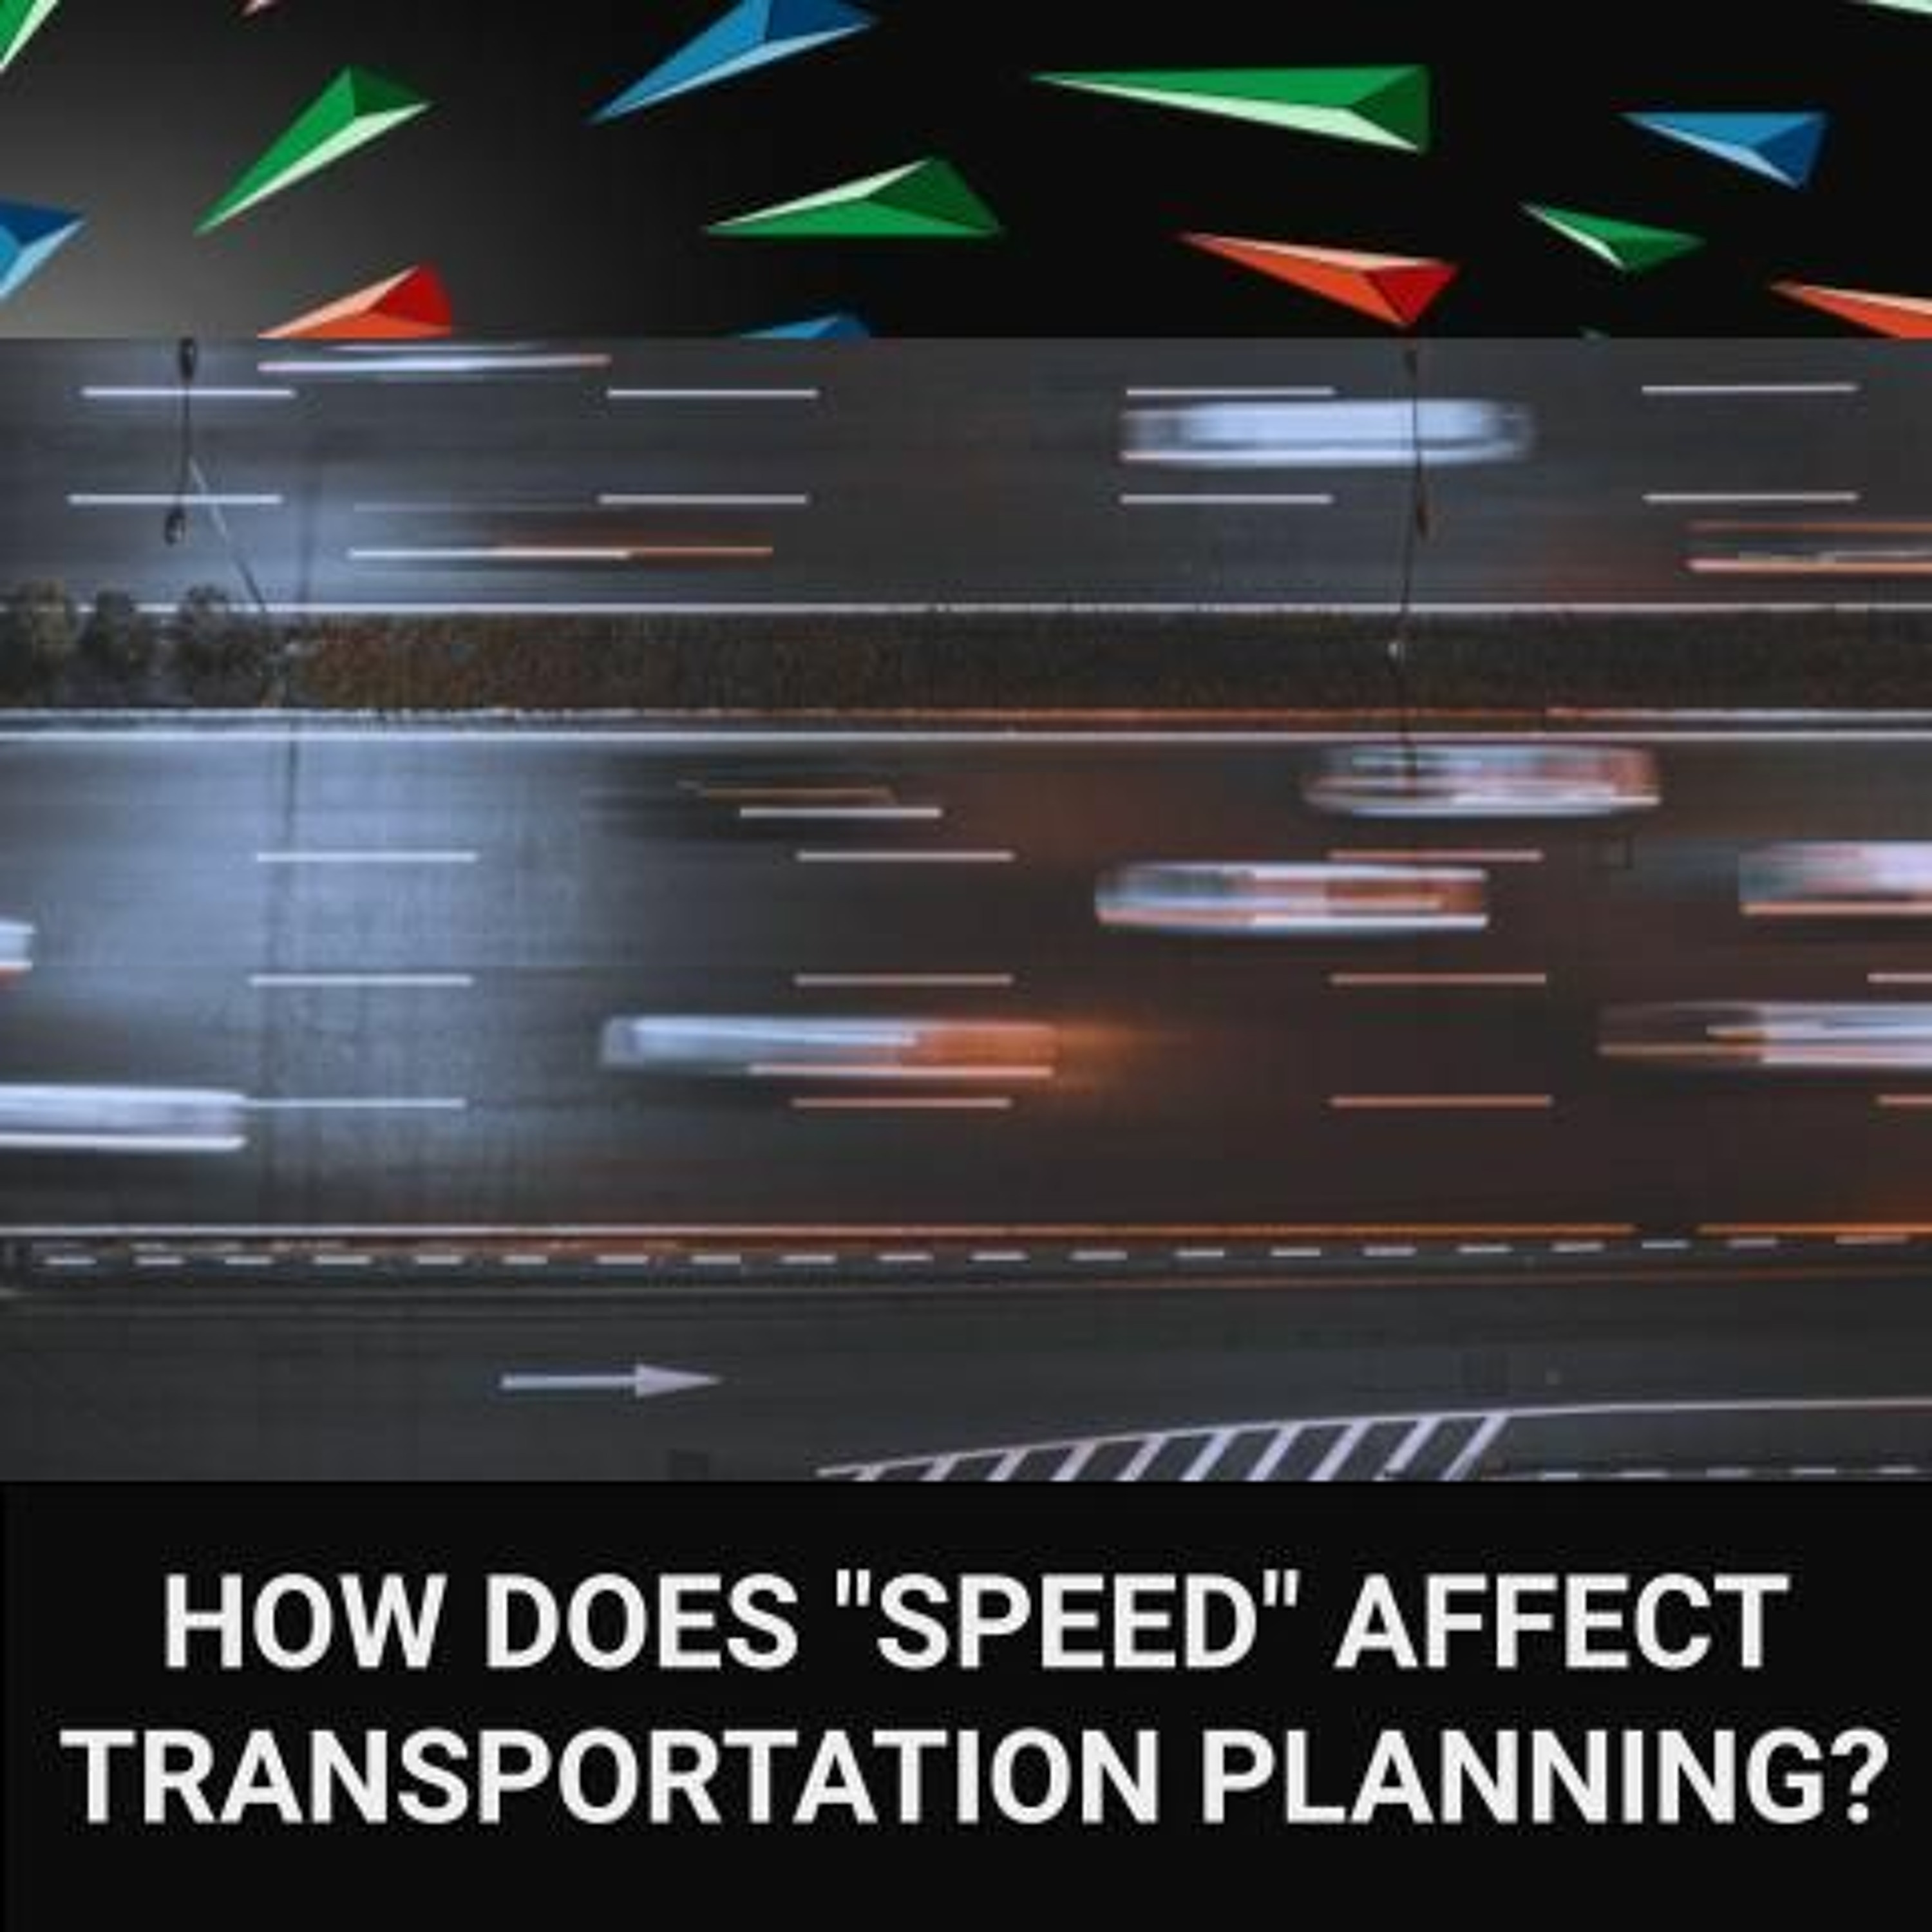 E212 - How Does “Speed” Affect Transportation Planning?